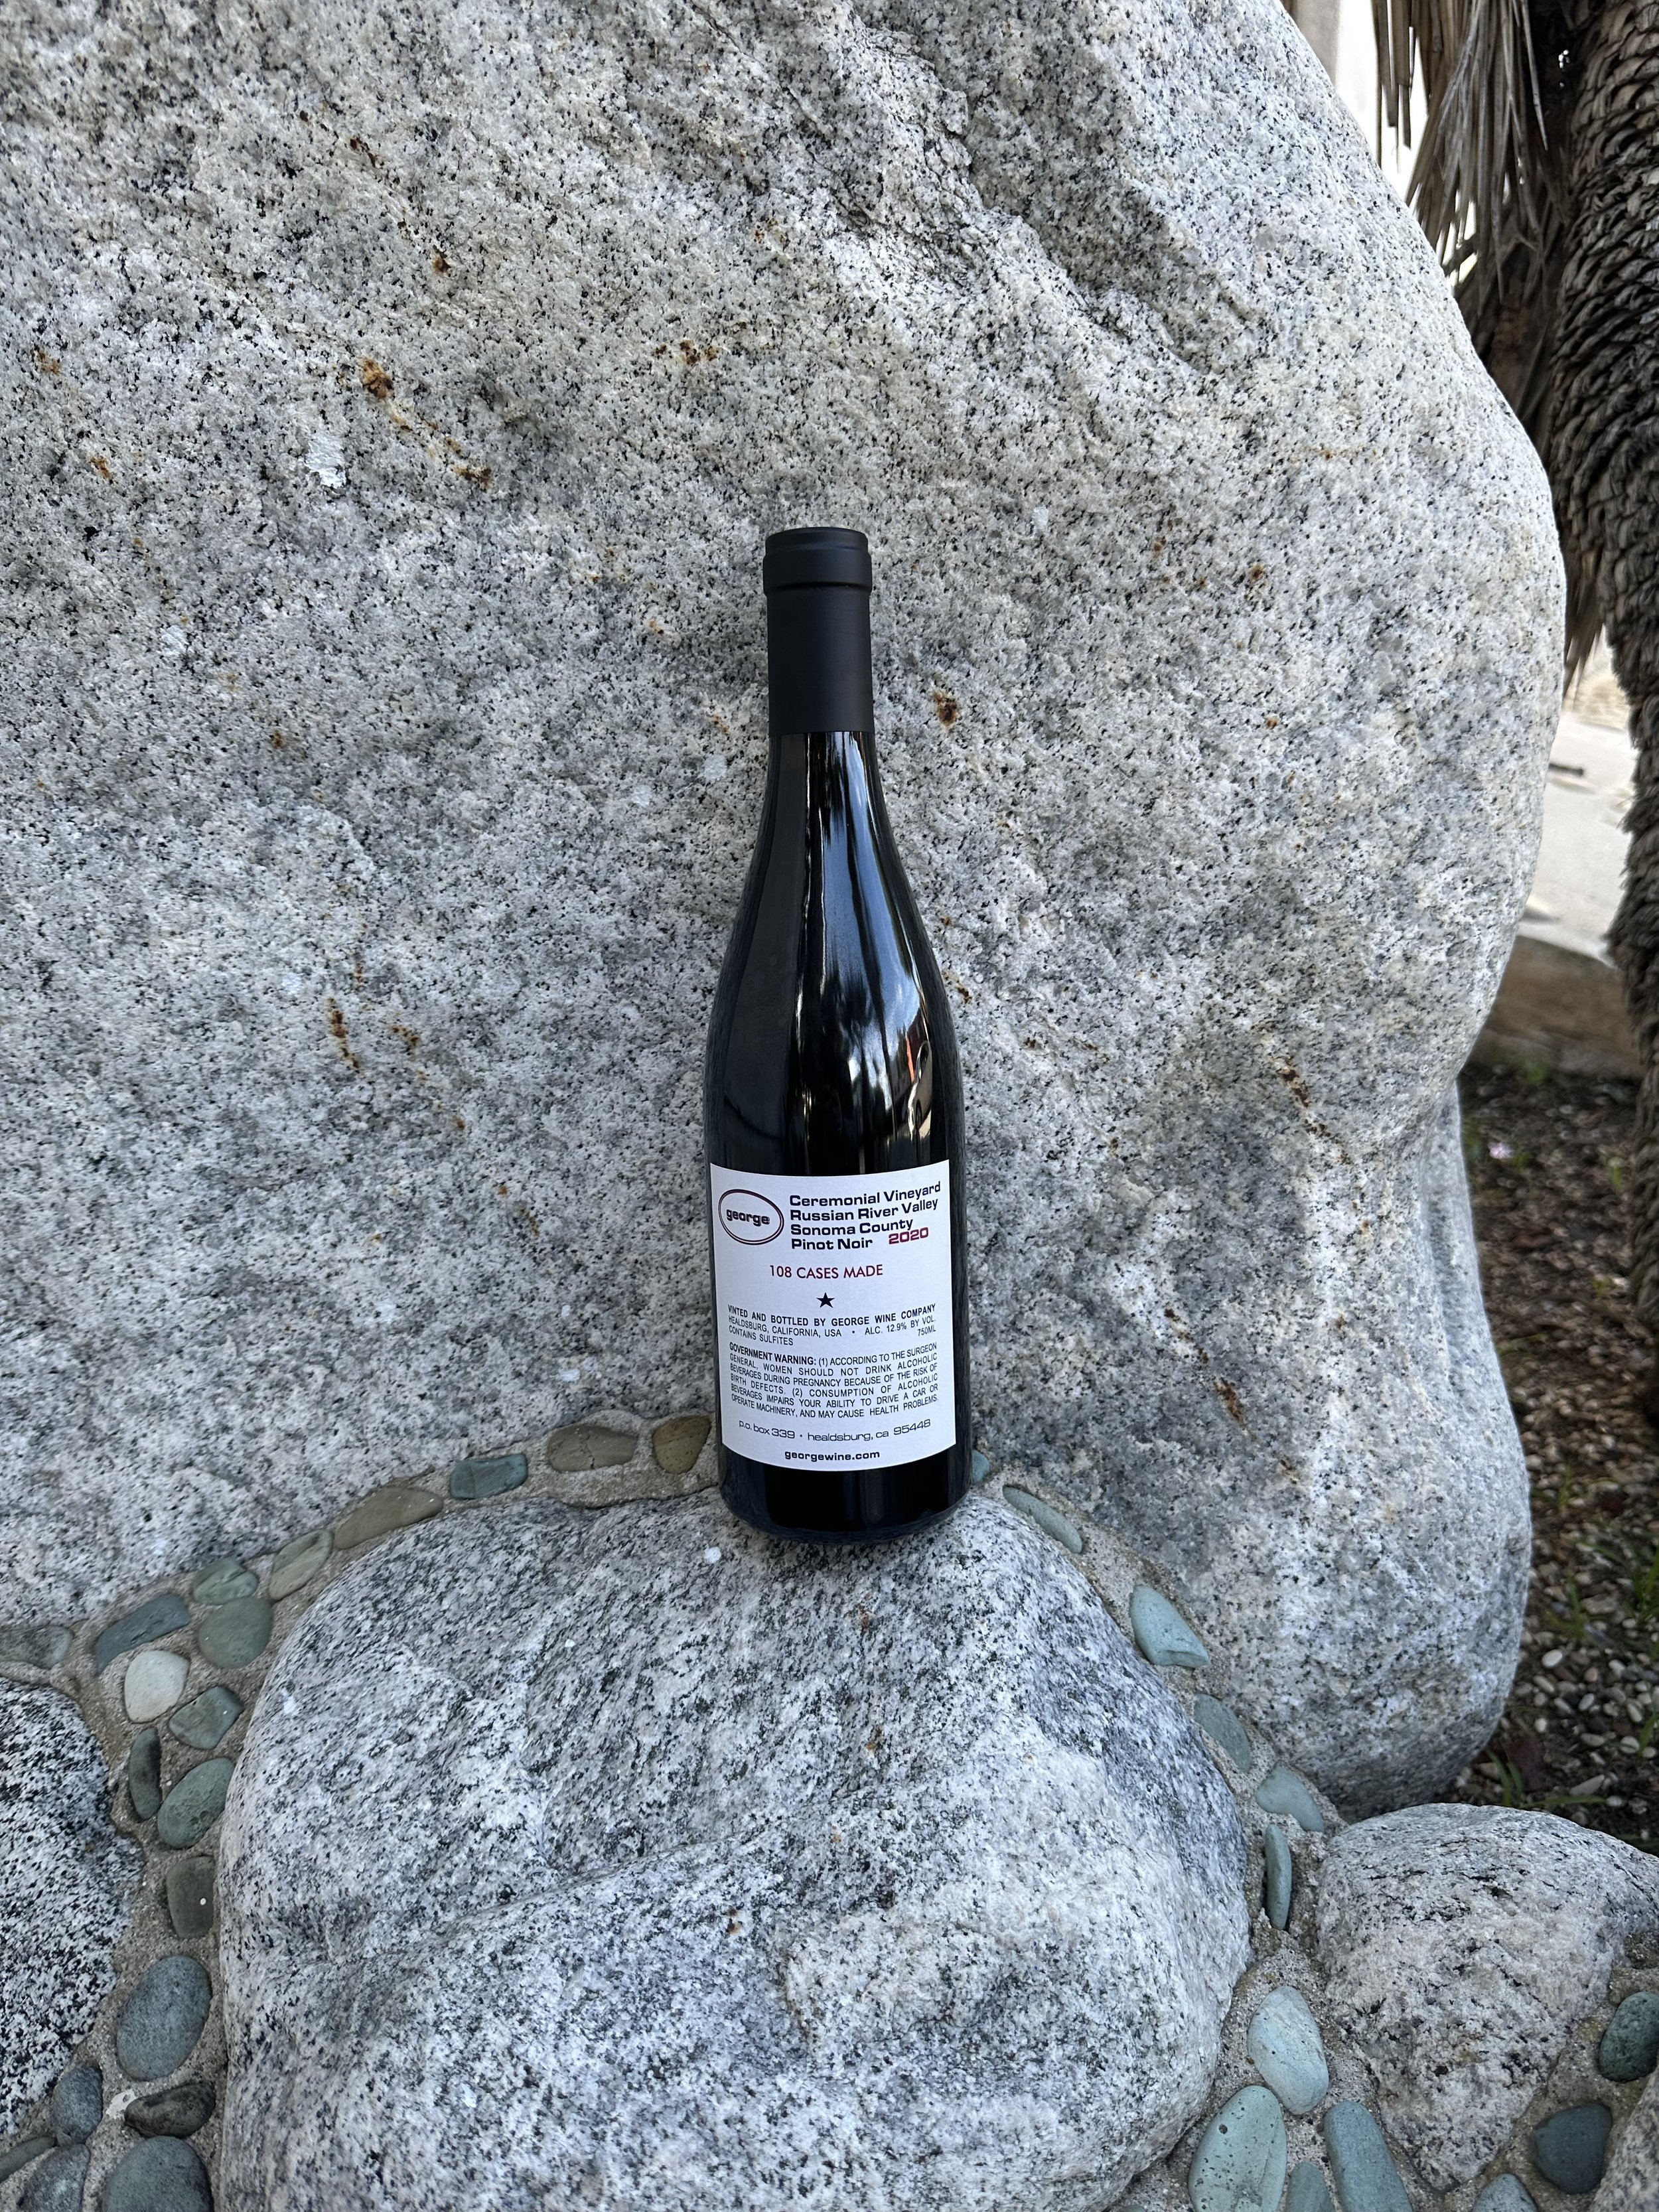 2021 George Ceremonial Vyd Pinot Noir, Russian River Valley — Vinocity Selections pic